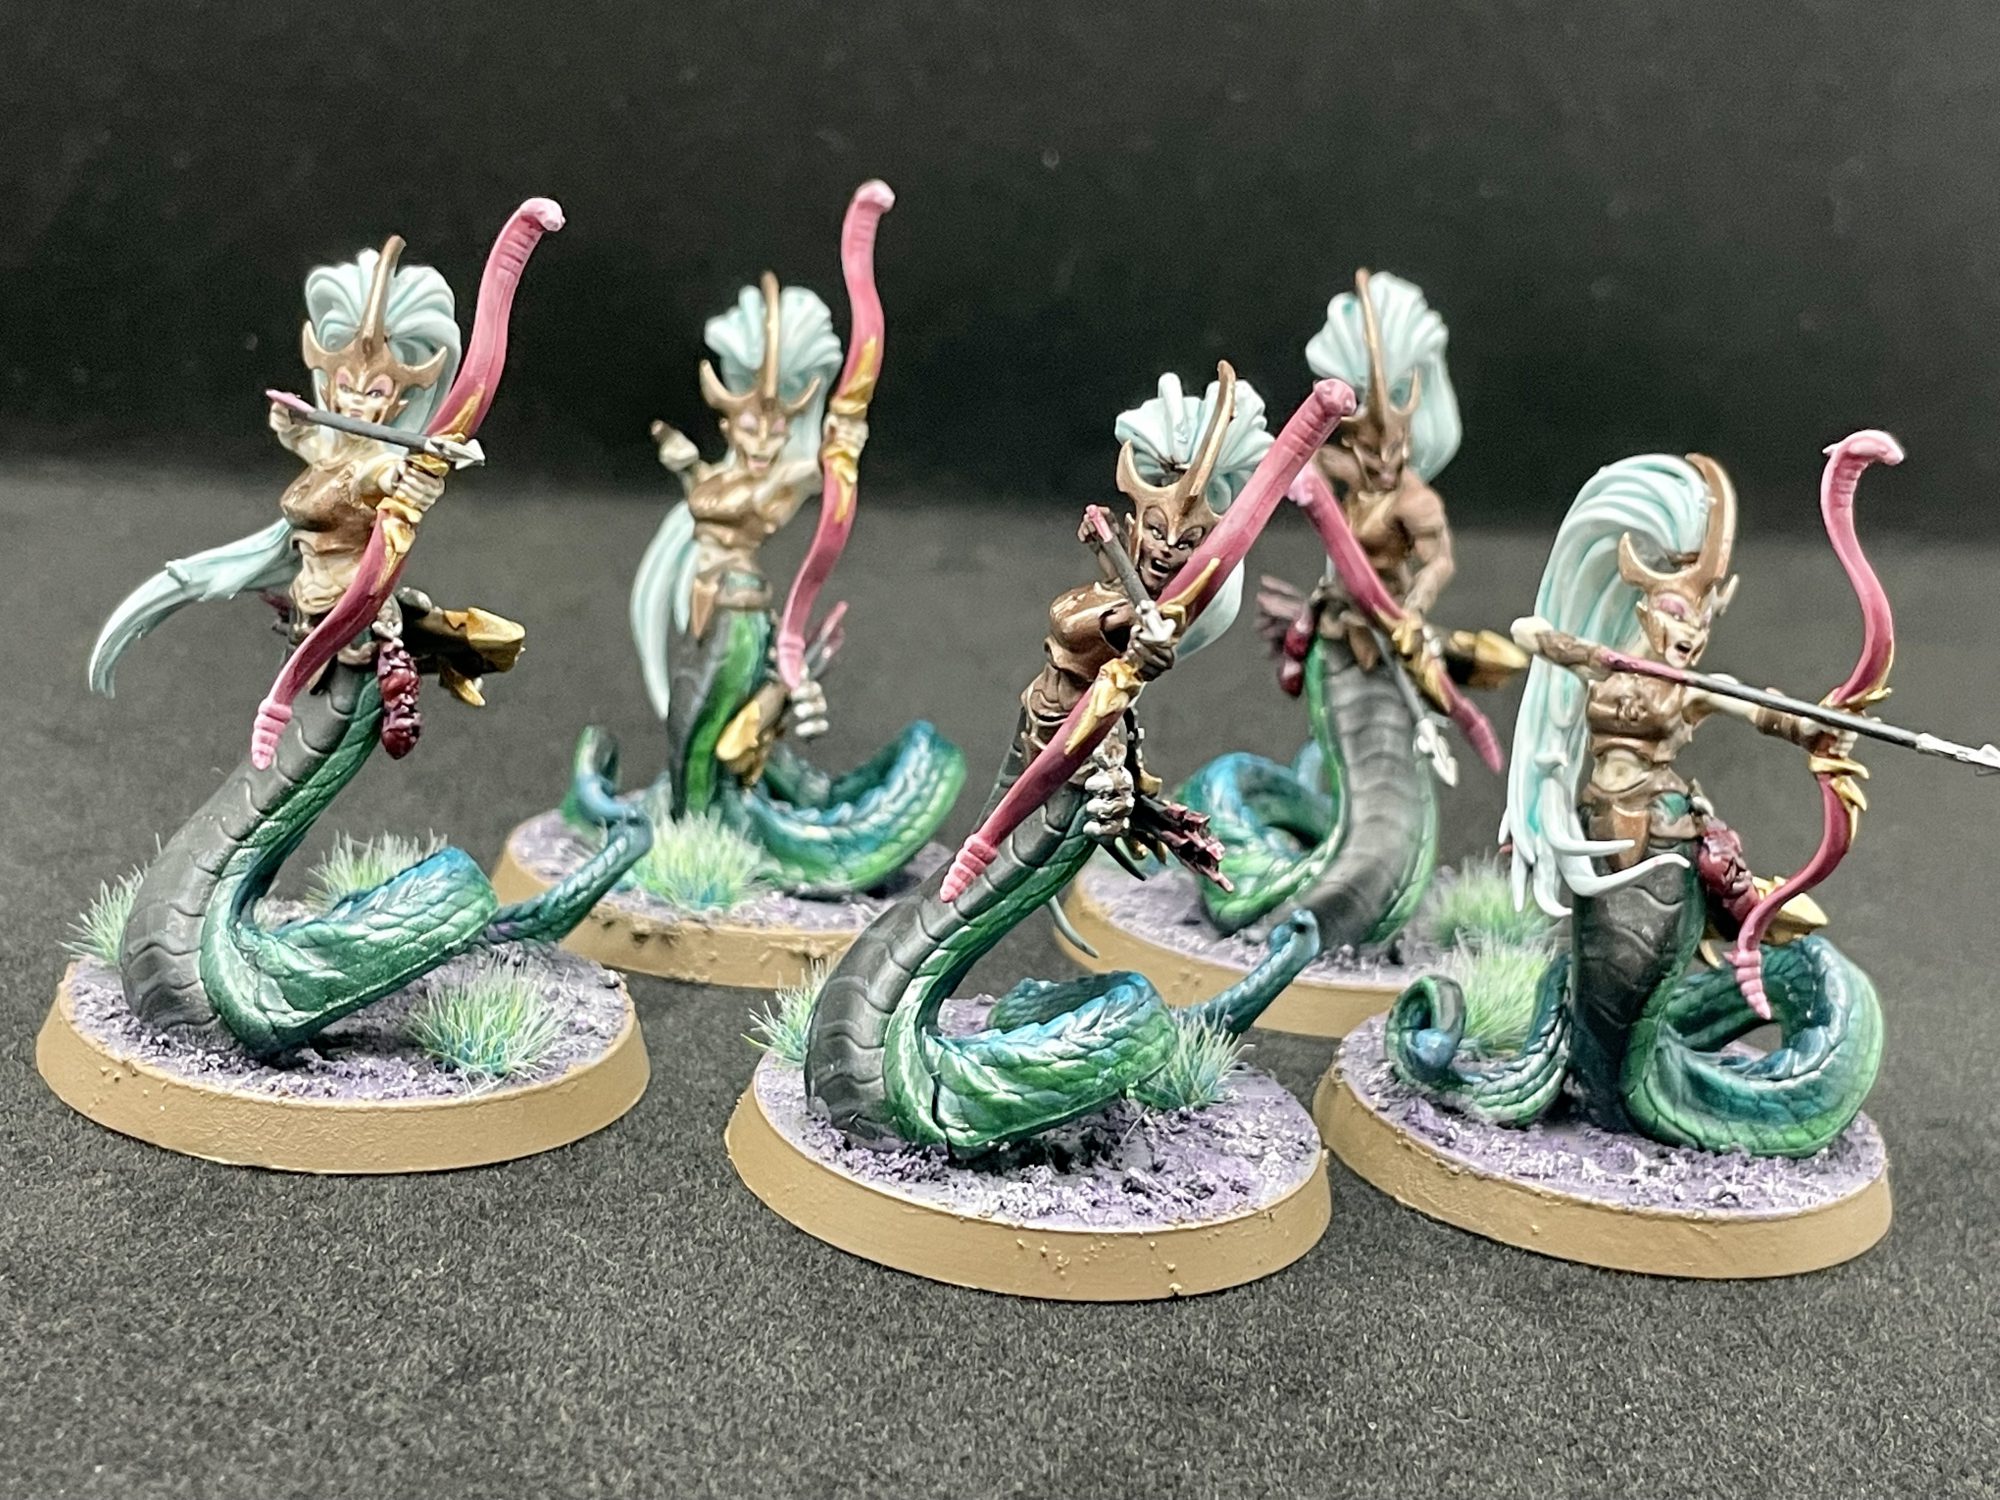 NEW Daughters of Khaine Warhammer Age of Sigmar Cauldron of Blood Medusa 